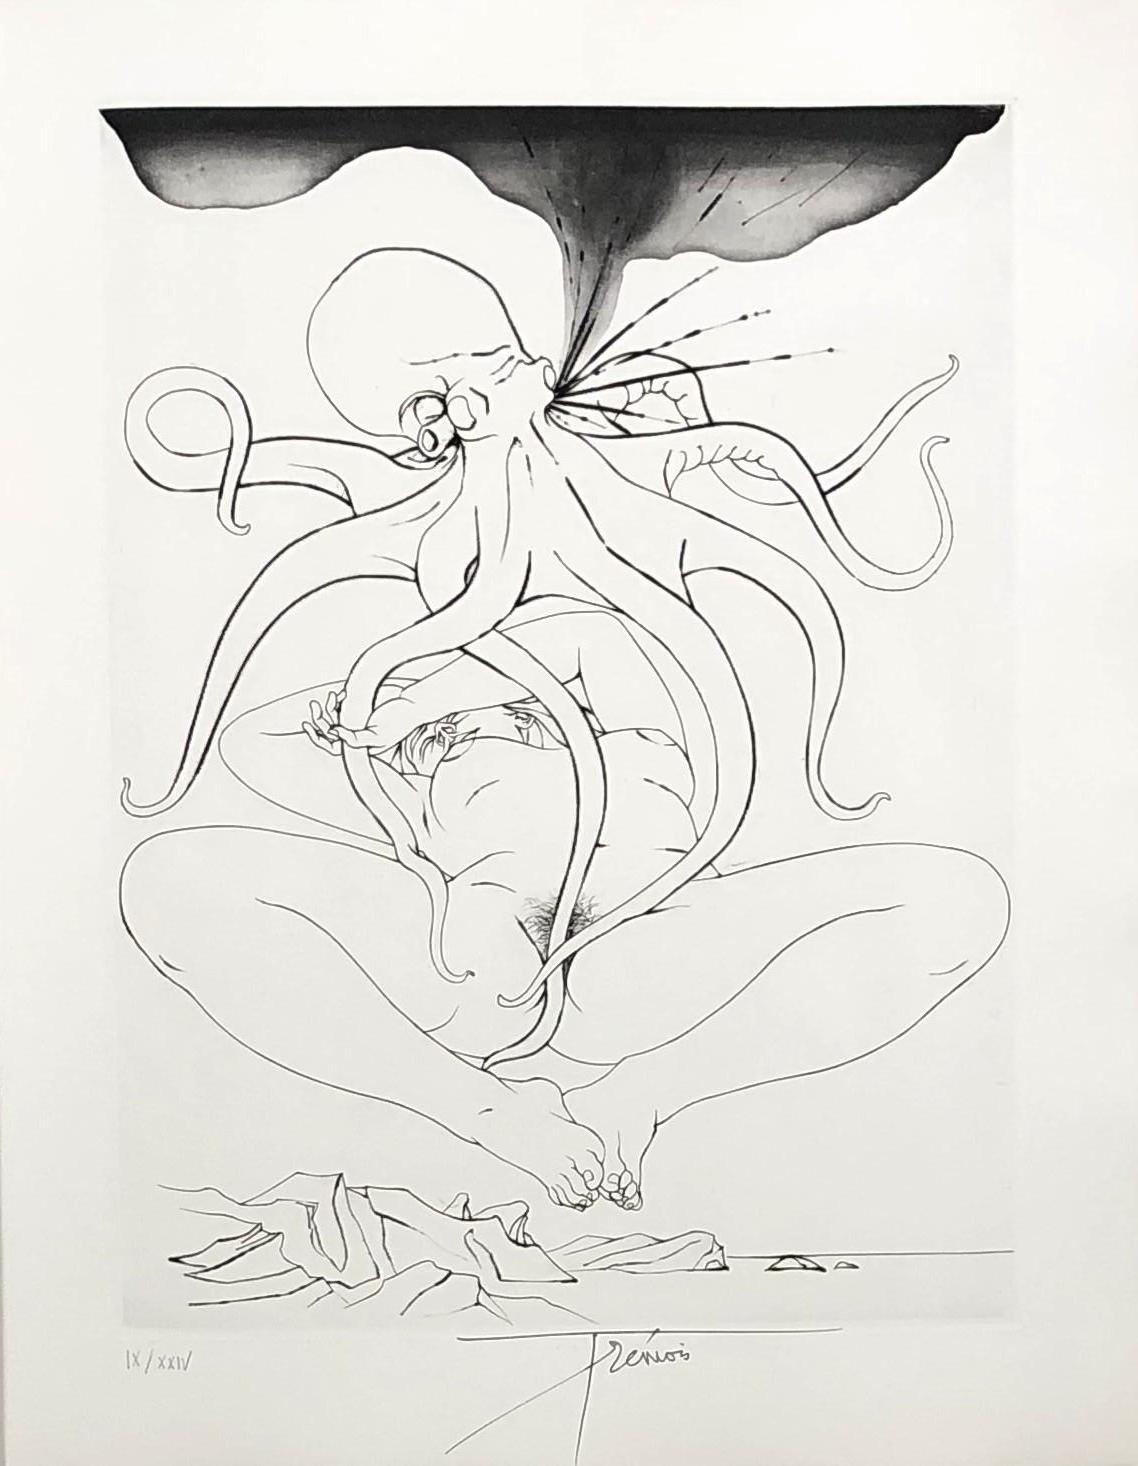 Naked Woman Lying Down - Original etching handsigned and numbered